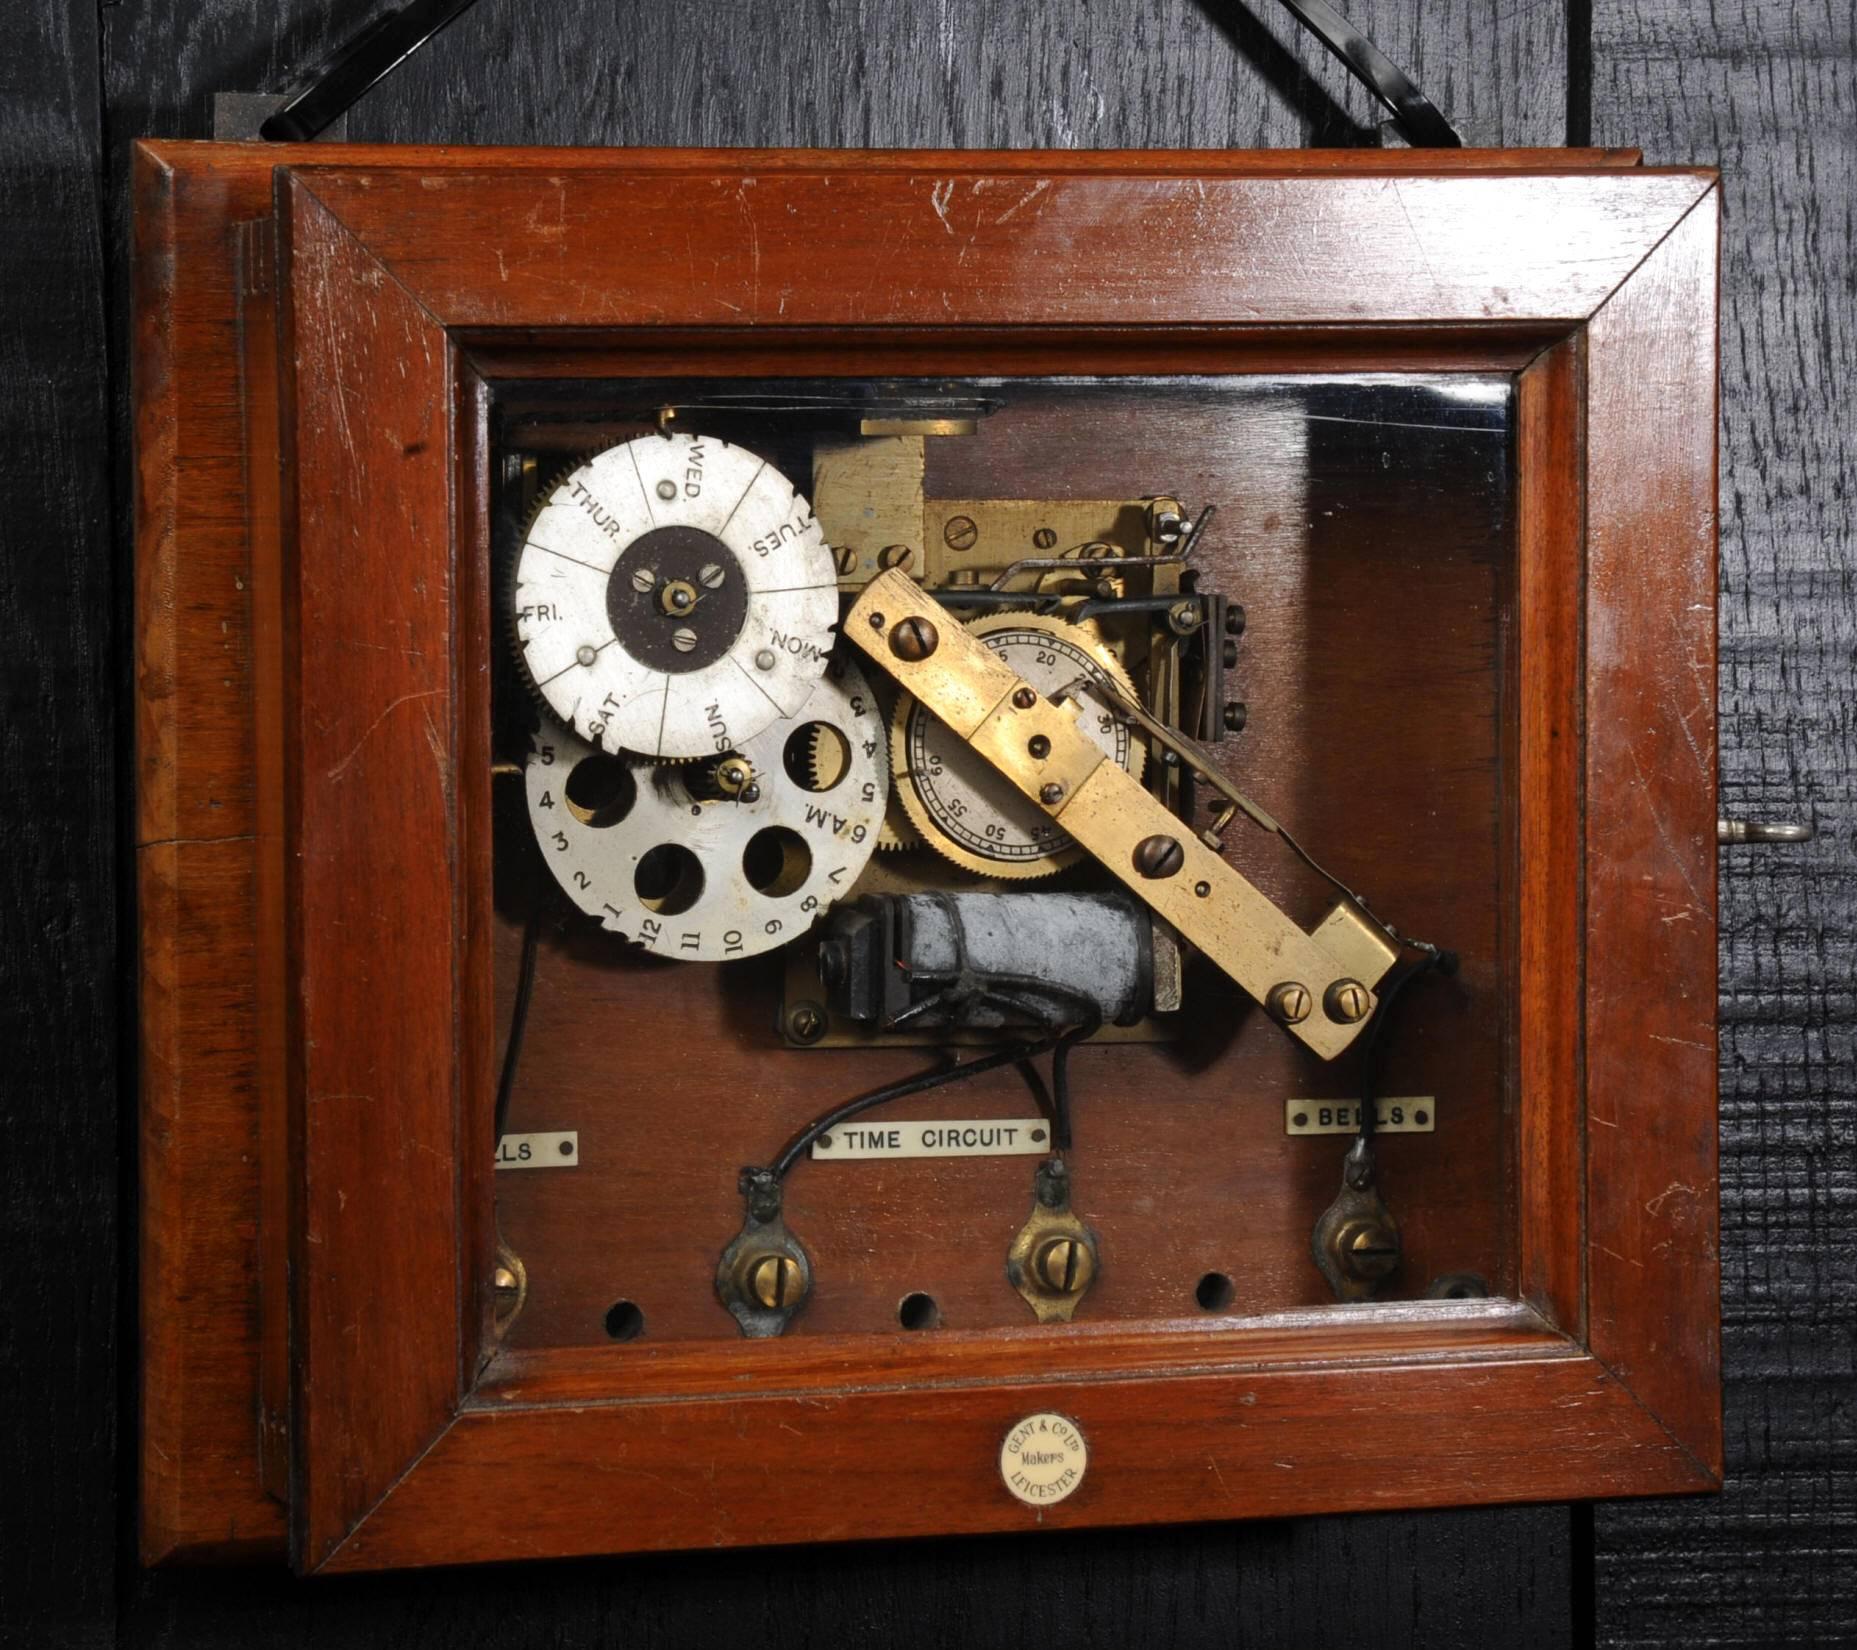 An Industrial Electro-mechanical programmer by Gents of Leicester, part of their Pulsynetic factory time system. Beautifully made in mainly brass in a polished mahogany case, can be wall hung via the two loops. In good ex-industrial condition with a